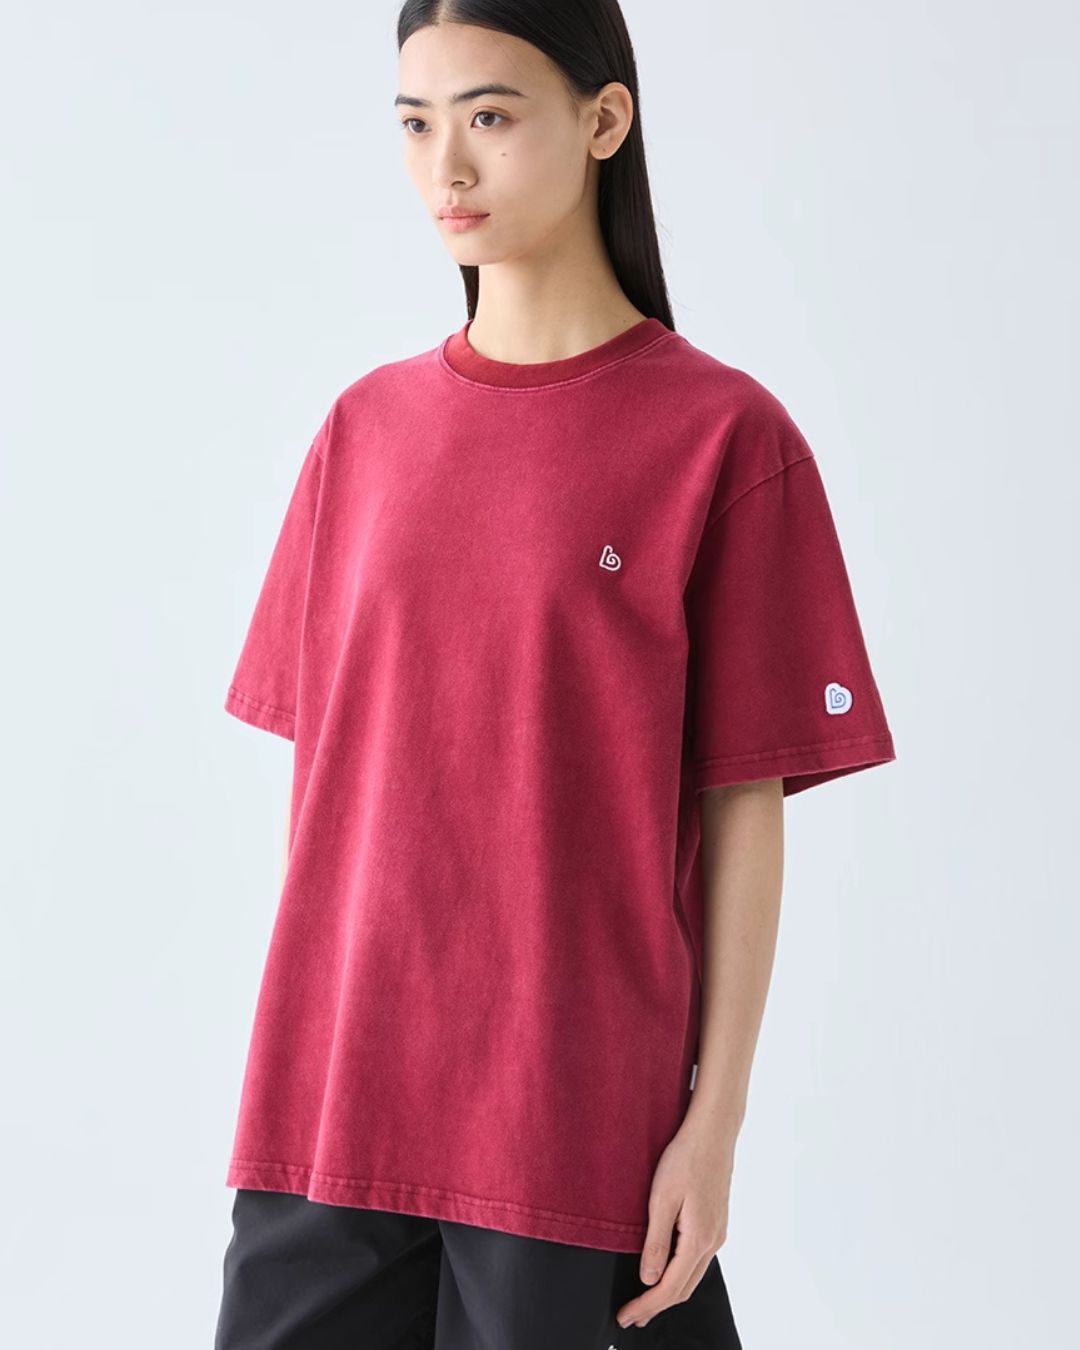 Washed Color T-shirt　ST088